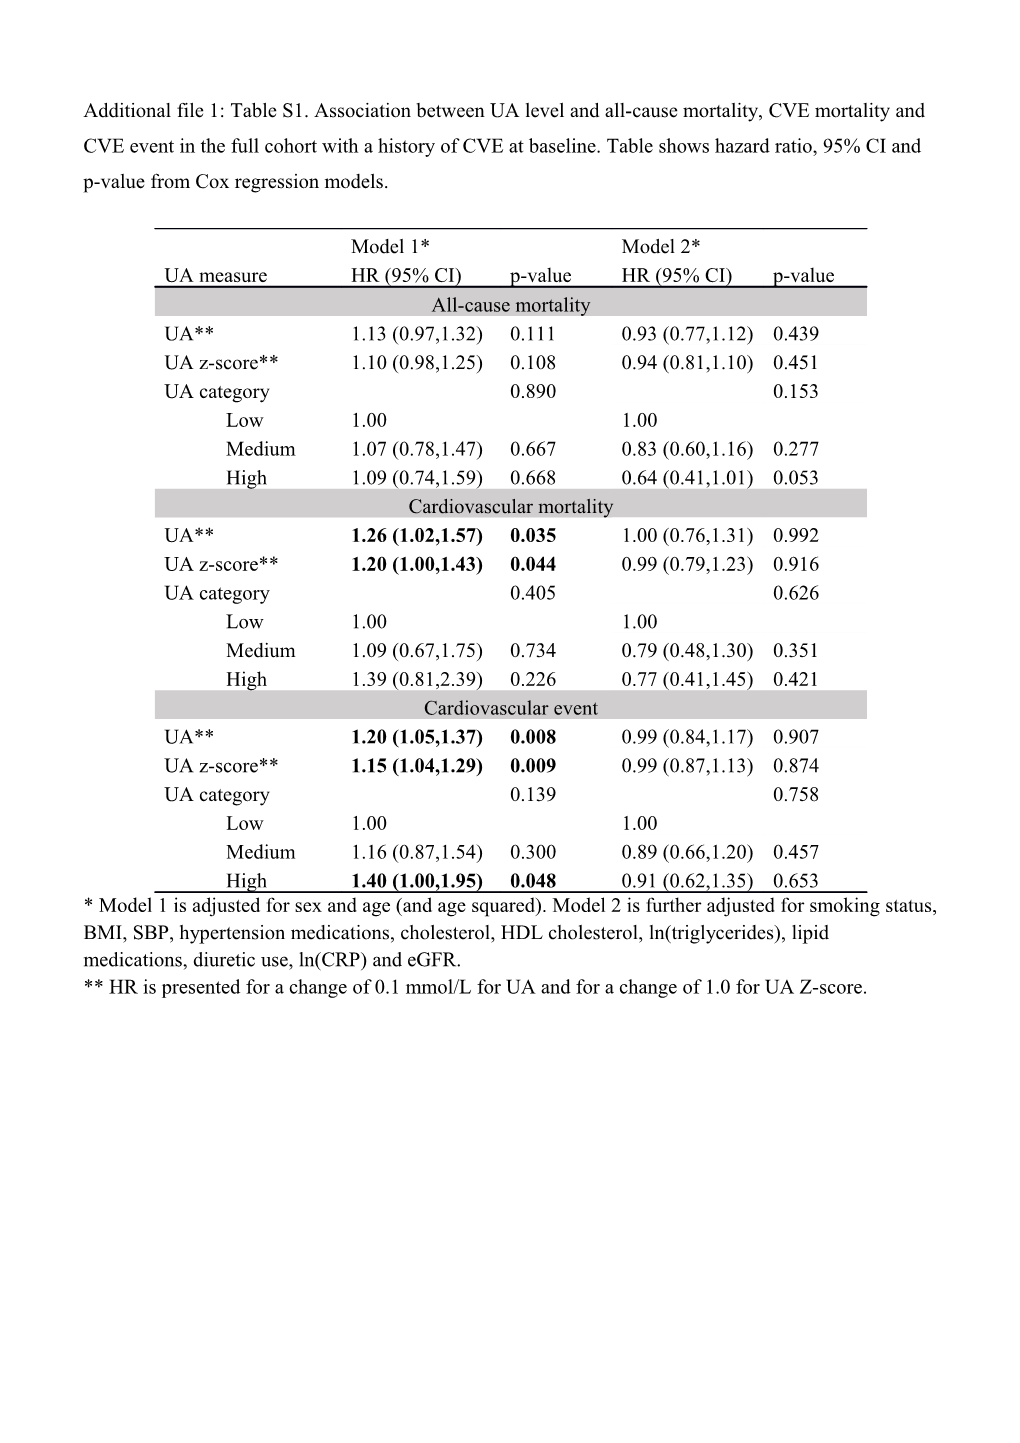 Additional File 1:Table S1. Association Between UA Level and All-Cause Mortality, CVE Mortality